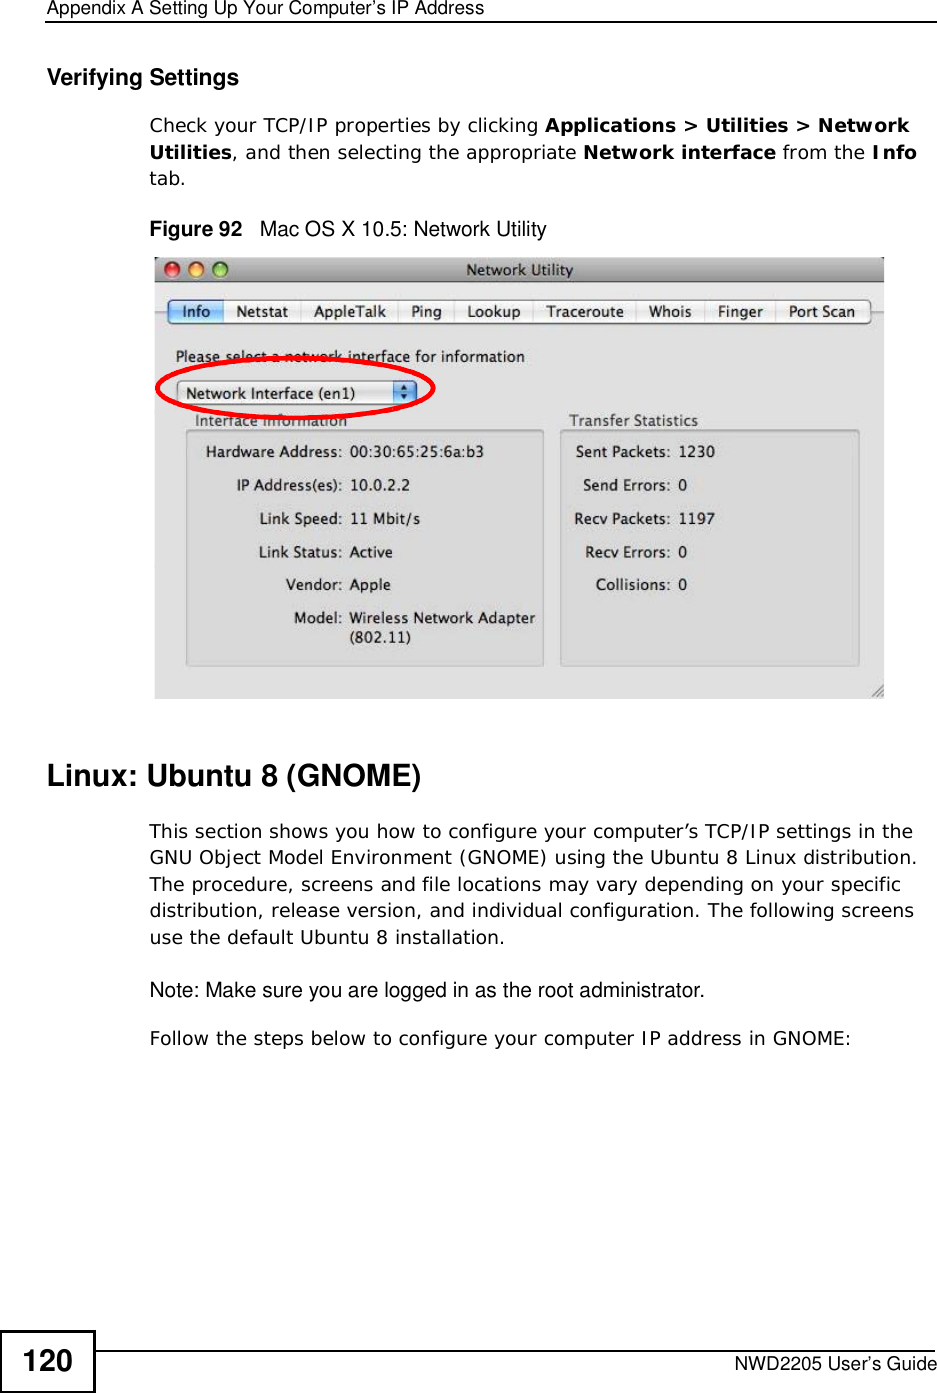 Appendix ASetting Up Your Computer’s IP AddressNWD2205 User’s Guide120Verifying SettingsCheck your TCP/IP properties by clicking Applications &gt; Utilities &gt; Network Utilities, and then selecting the appropriate Network interface from the Infotab.Figure 92   Mac OS X 10.5: Network UtilityLinux: Ubuntu 8 (GNOME)This section shows you how to configure your computer’s TCP/IP settings in the GNU Object Model Environment (GNOME) using the Ubuntu 8 Linux distribution. The procedure, screens and file locations may vary depending on your specific distribution, release version, and individual configuration. The following screens use the default Ubuntu 8 installation.Note: Make sure you are logged in as the root administrator. Follow the steps below to configure your computer IP address in GNOME: 